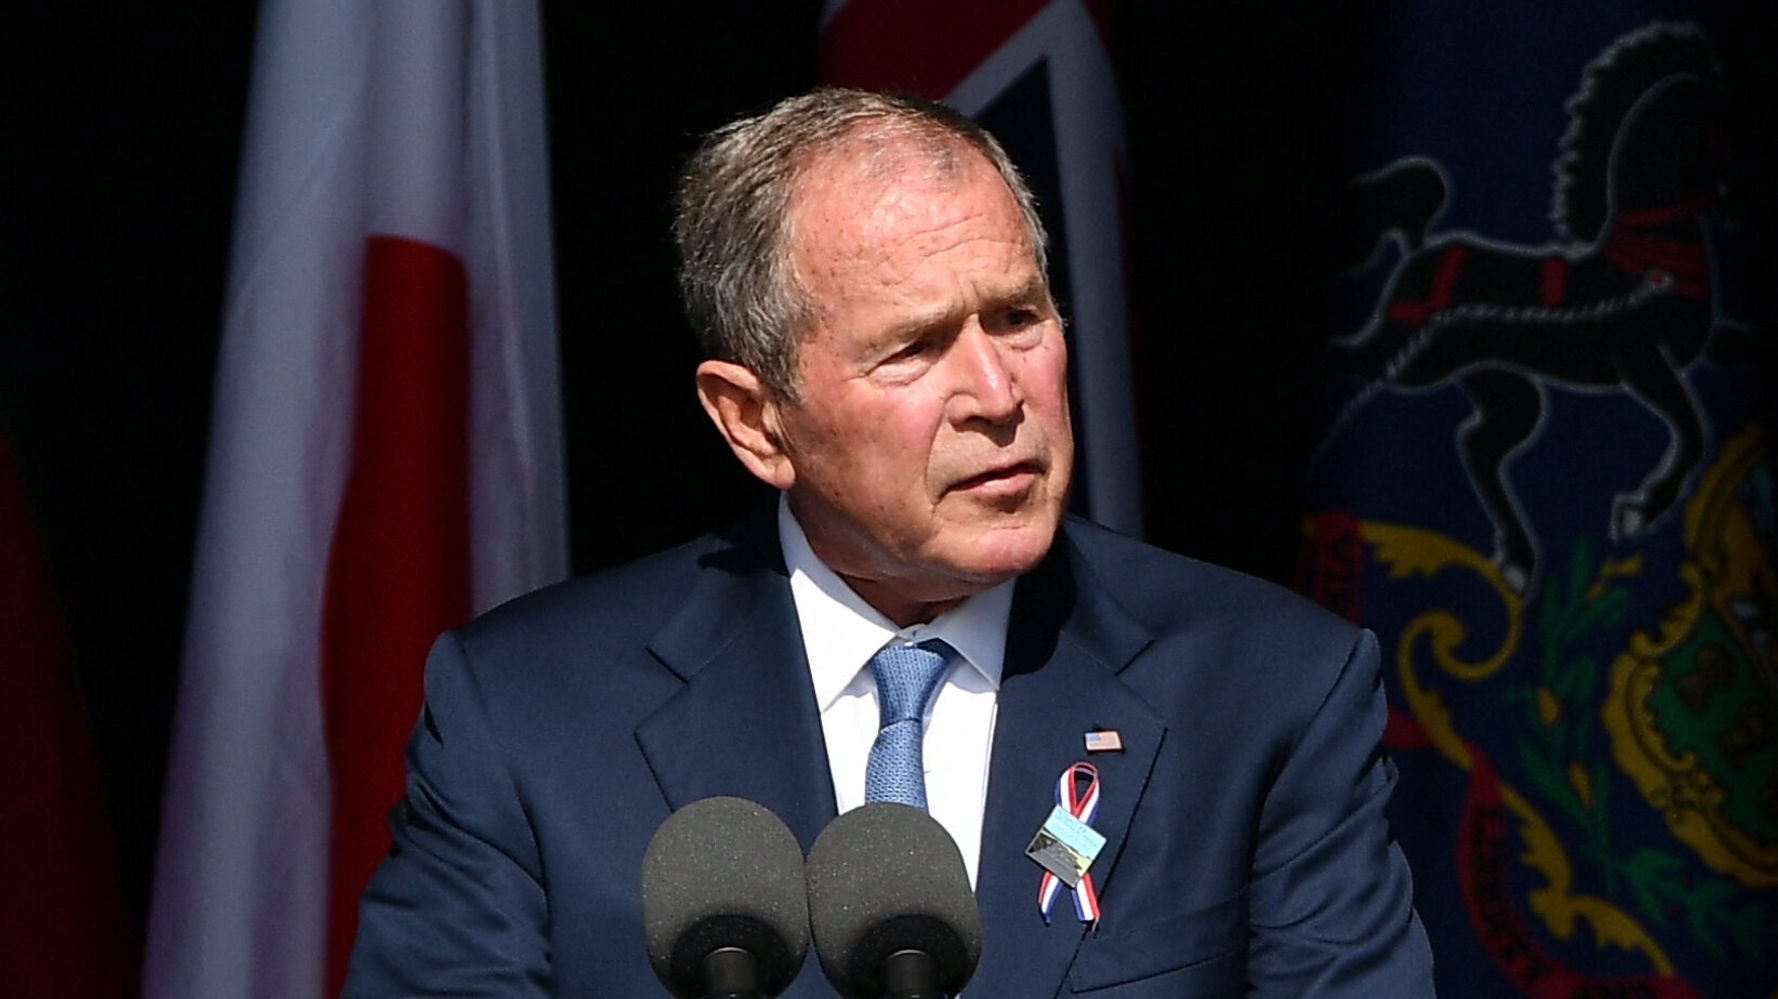 Bush Condemns Domestic And Foreign Extremism On 20th Anniversary Of 9/11 Attacks